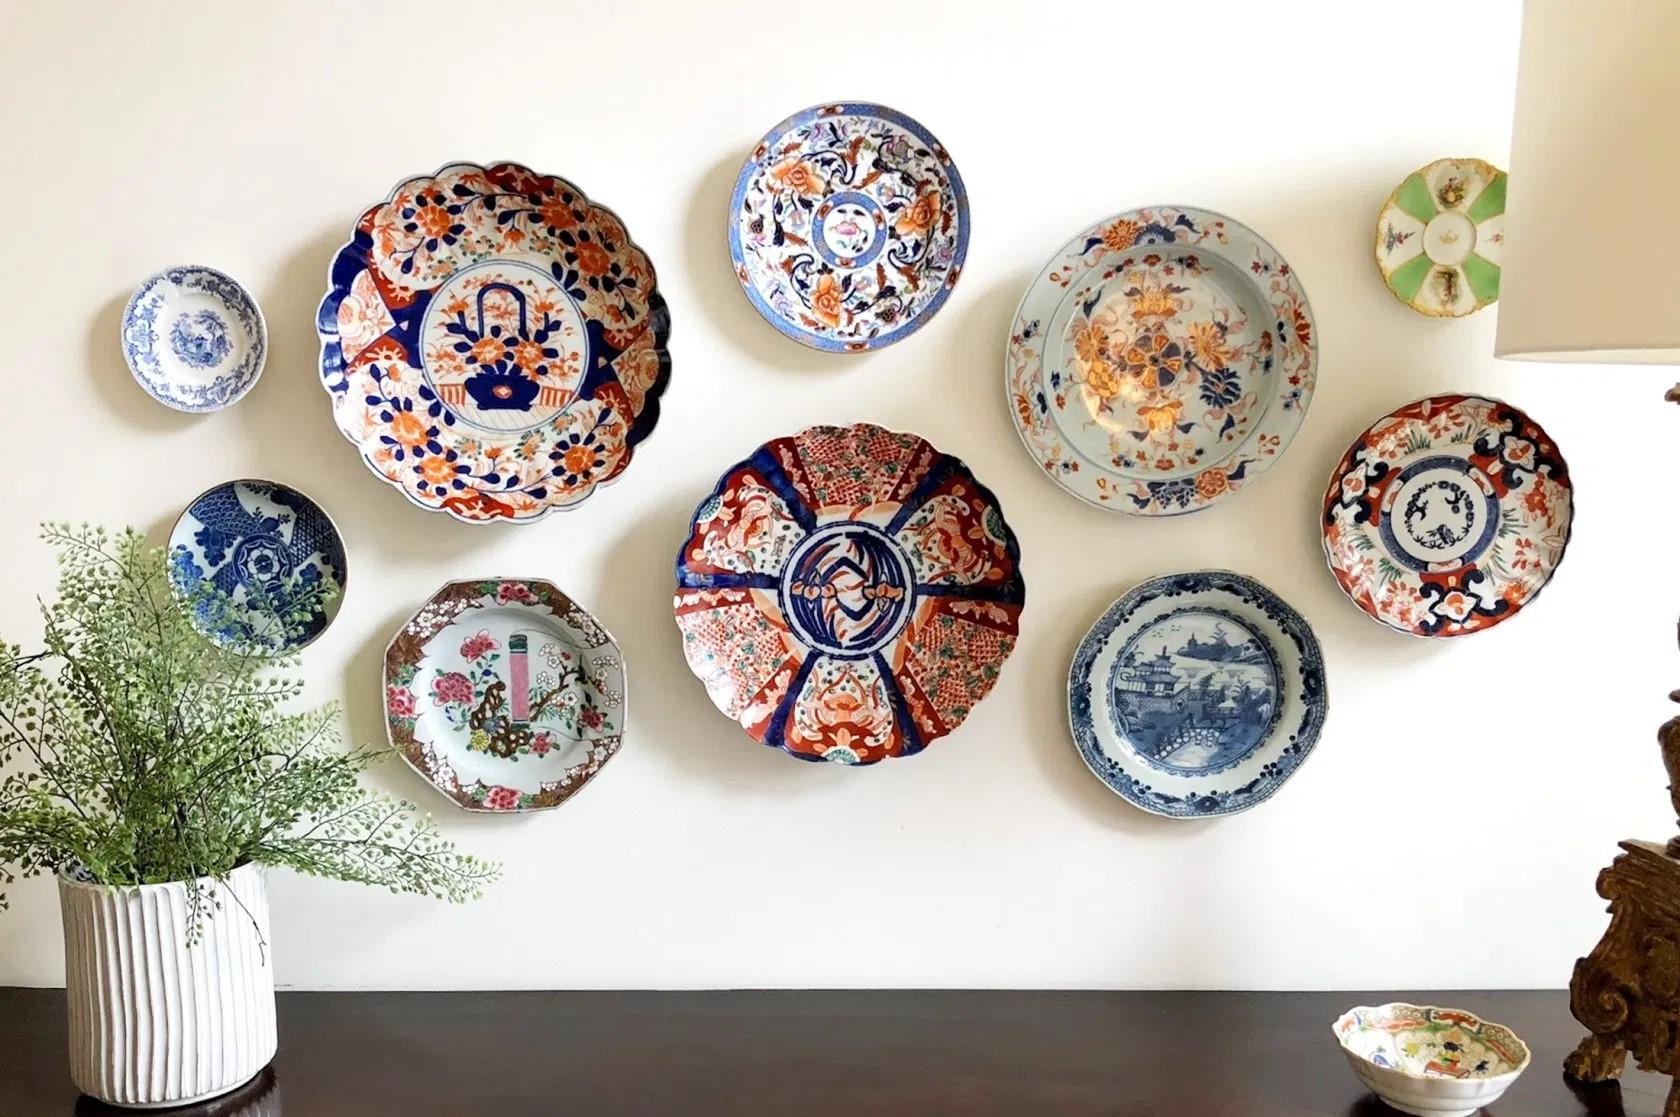 Perfect for interior wall decoration. We offer sets of 18th-19th century Chinese/Japanese Imari plates in different sizes. Available in every quantity needed. The selection in the pictures might not be available due to stock changes, but we have